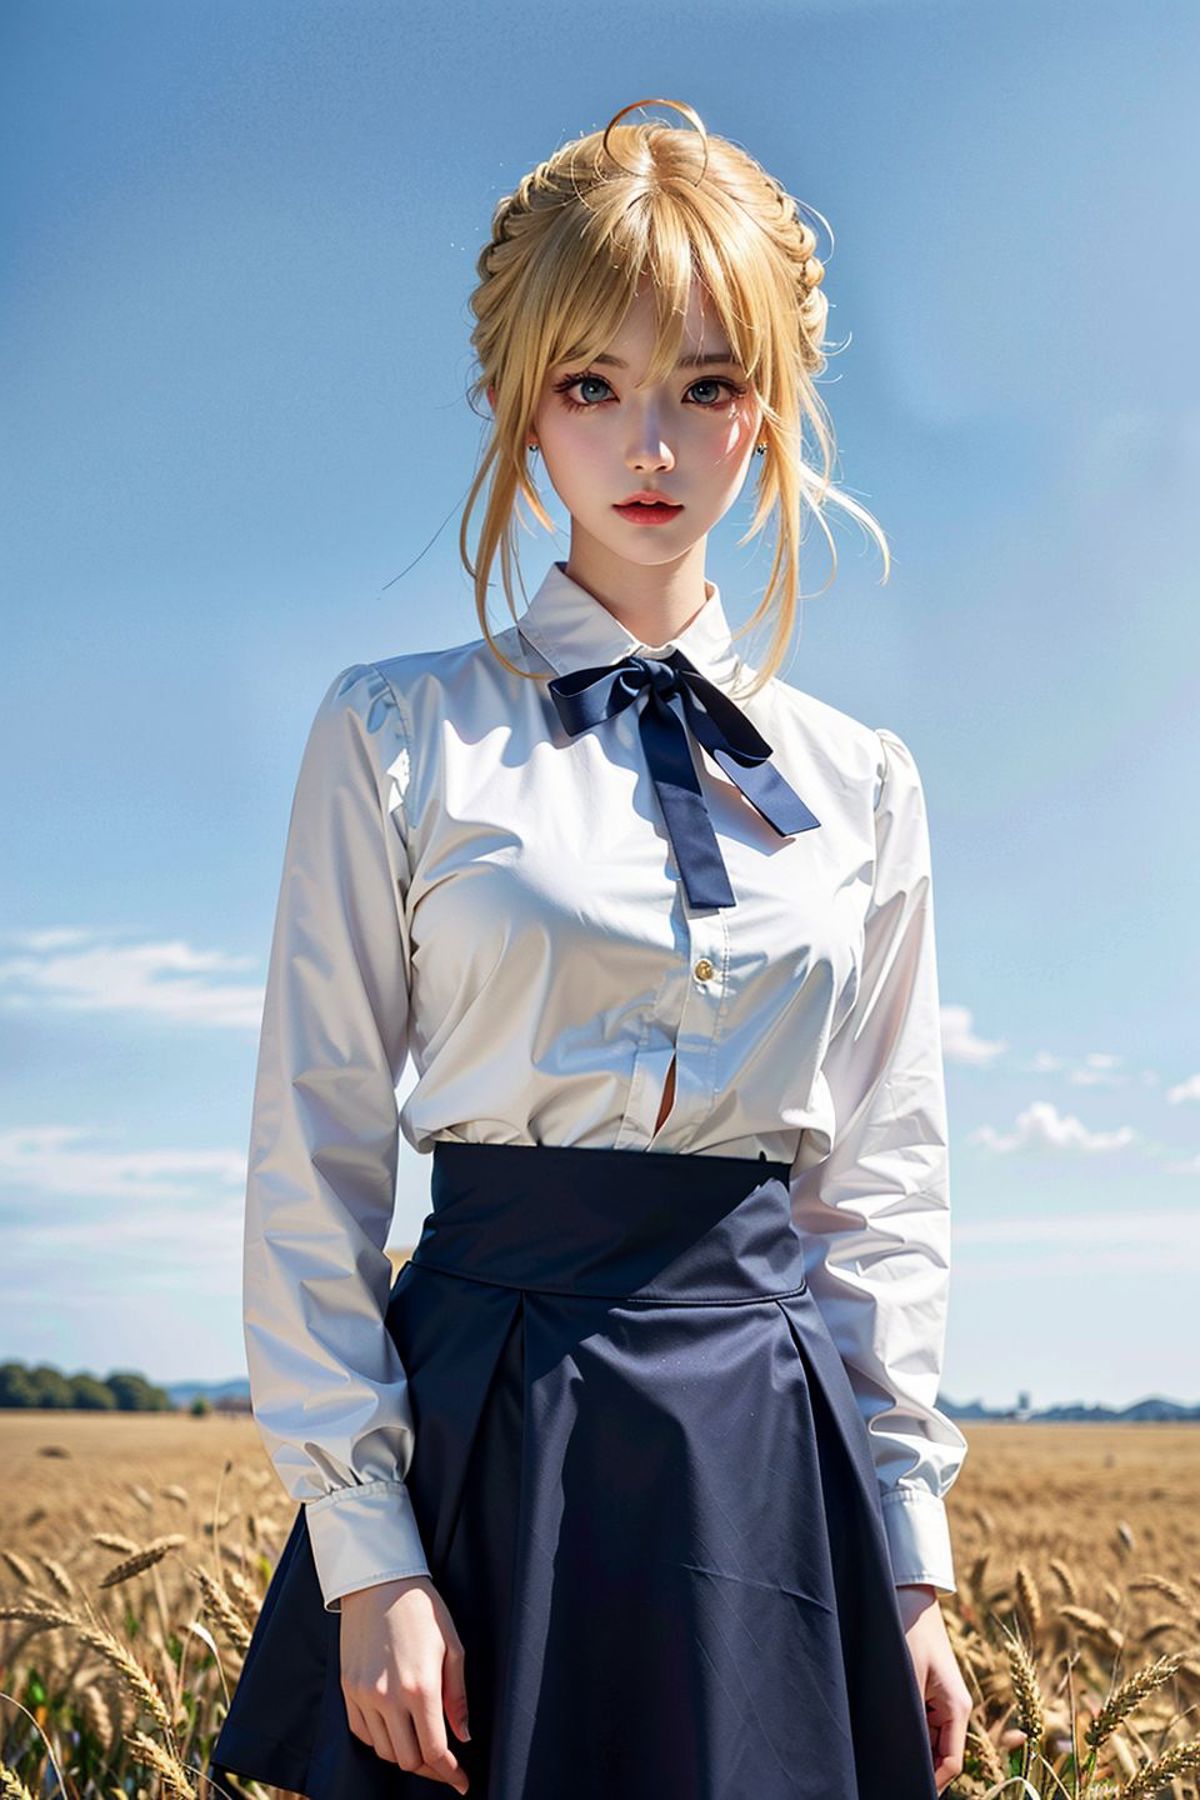 Saber 常服 FATE Saber image by ylnnn